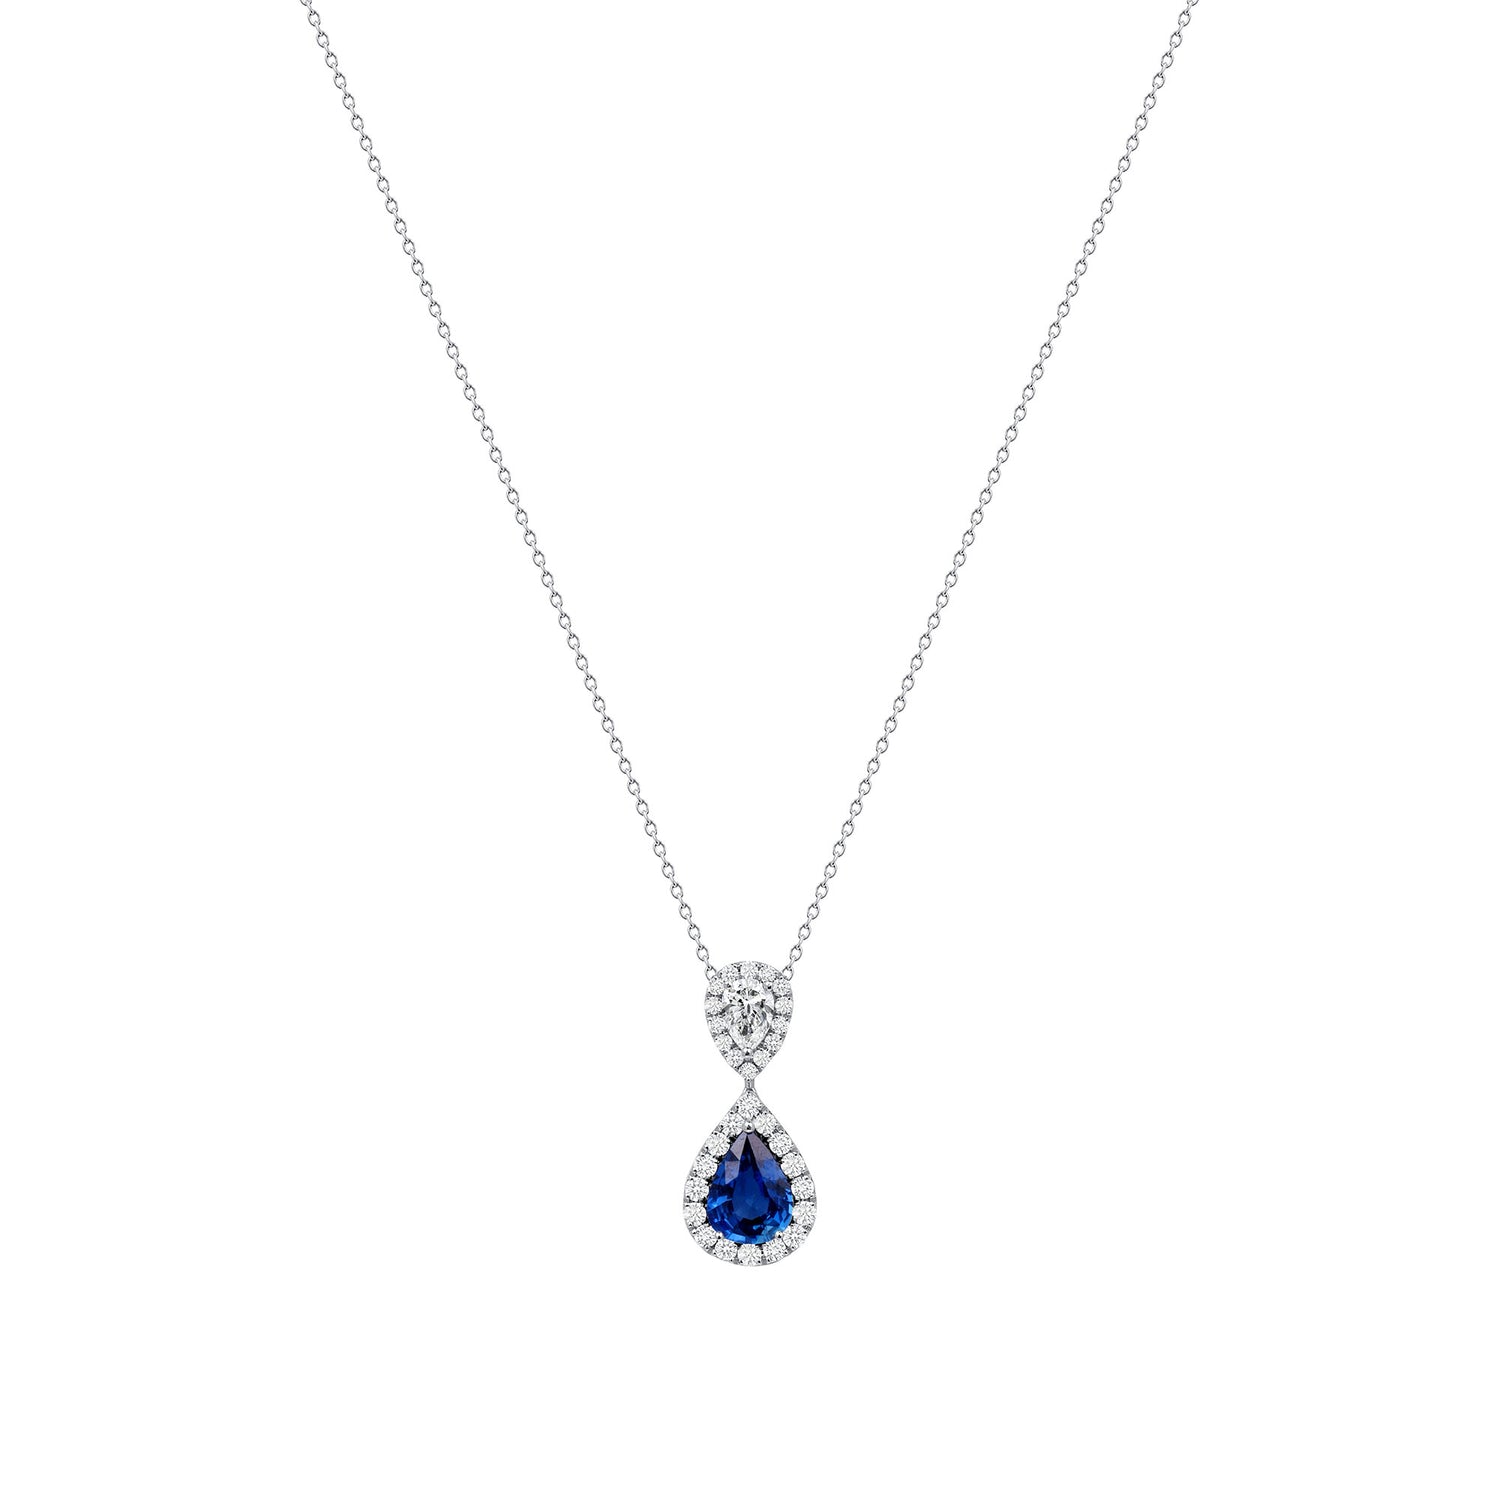 2.94 CT. Pear Cut Blue Sapphire and Diamond Pendant Necklace in 14K White Gold